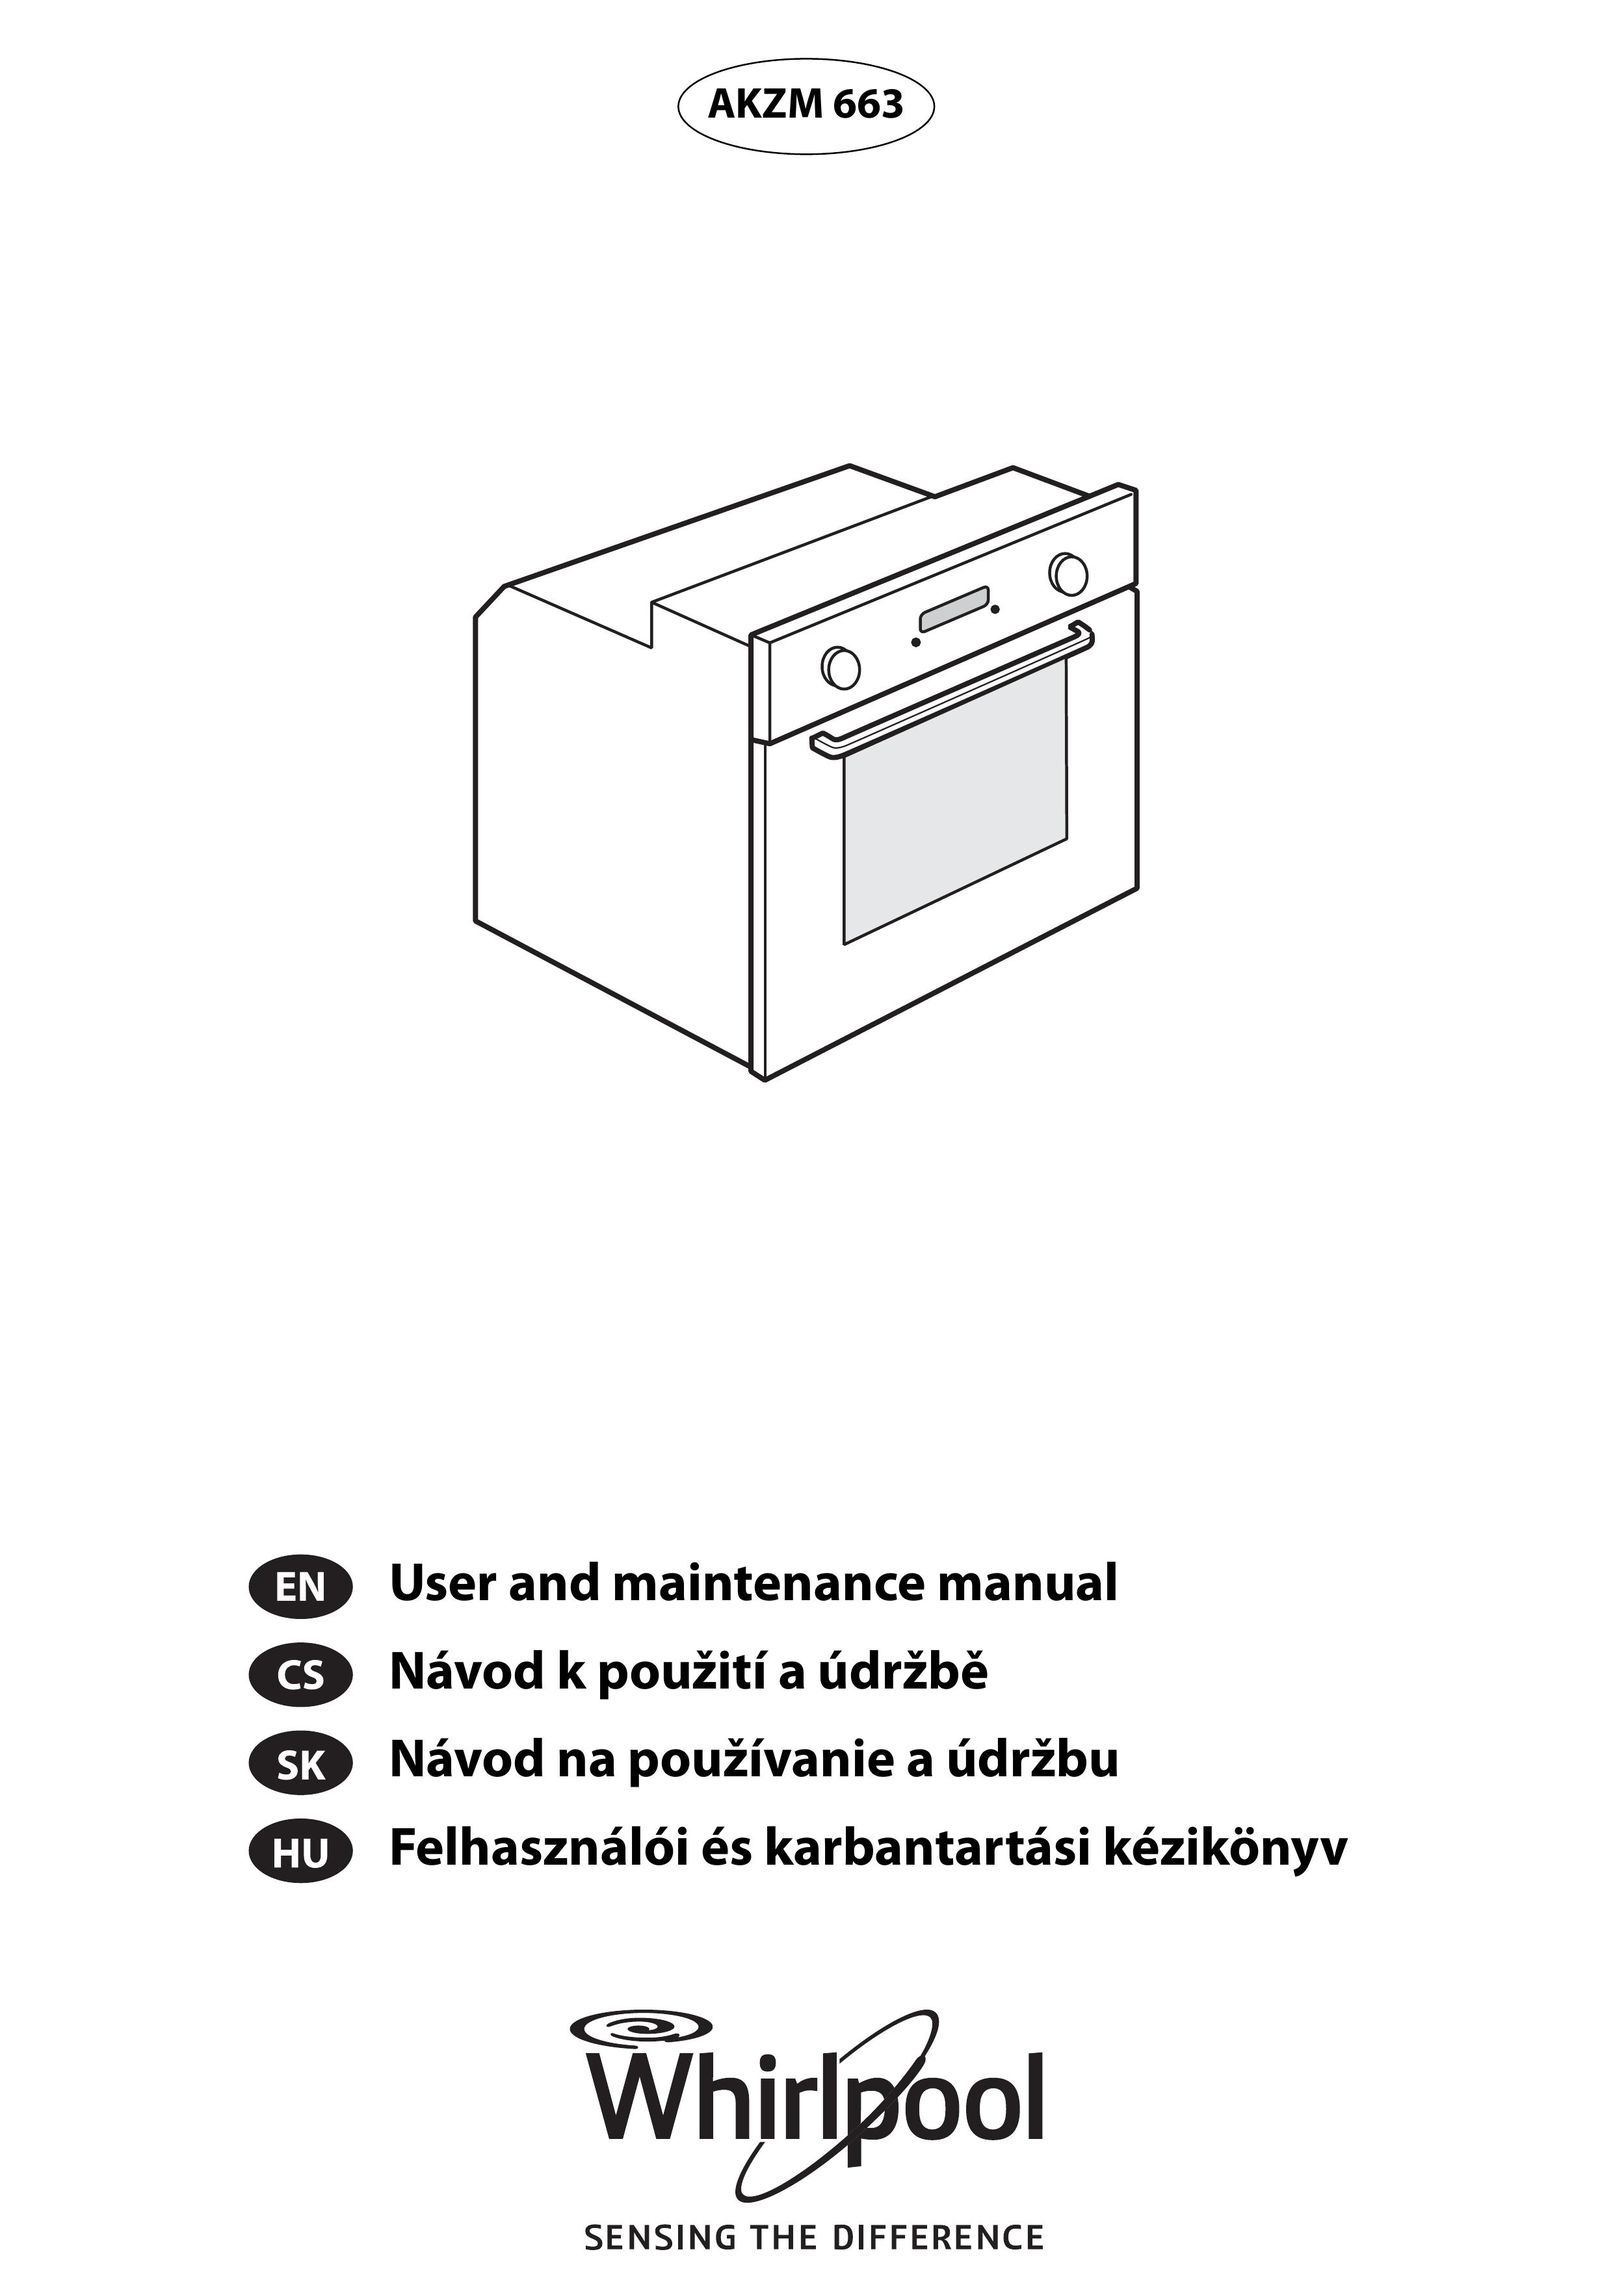 Whirlpool AKZM 663 Oven User Manual